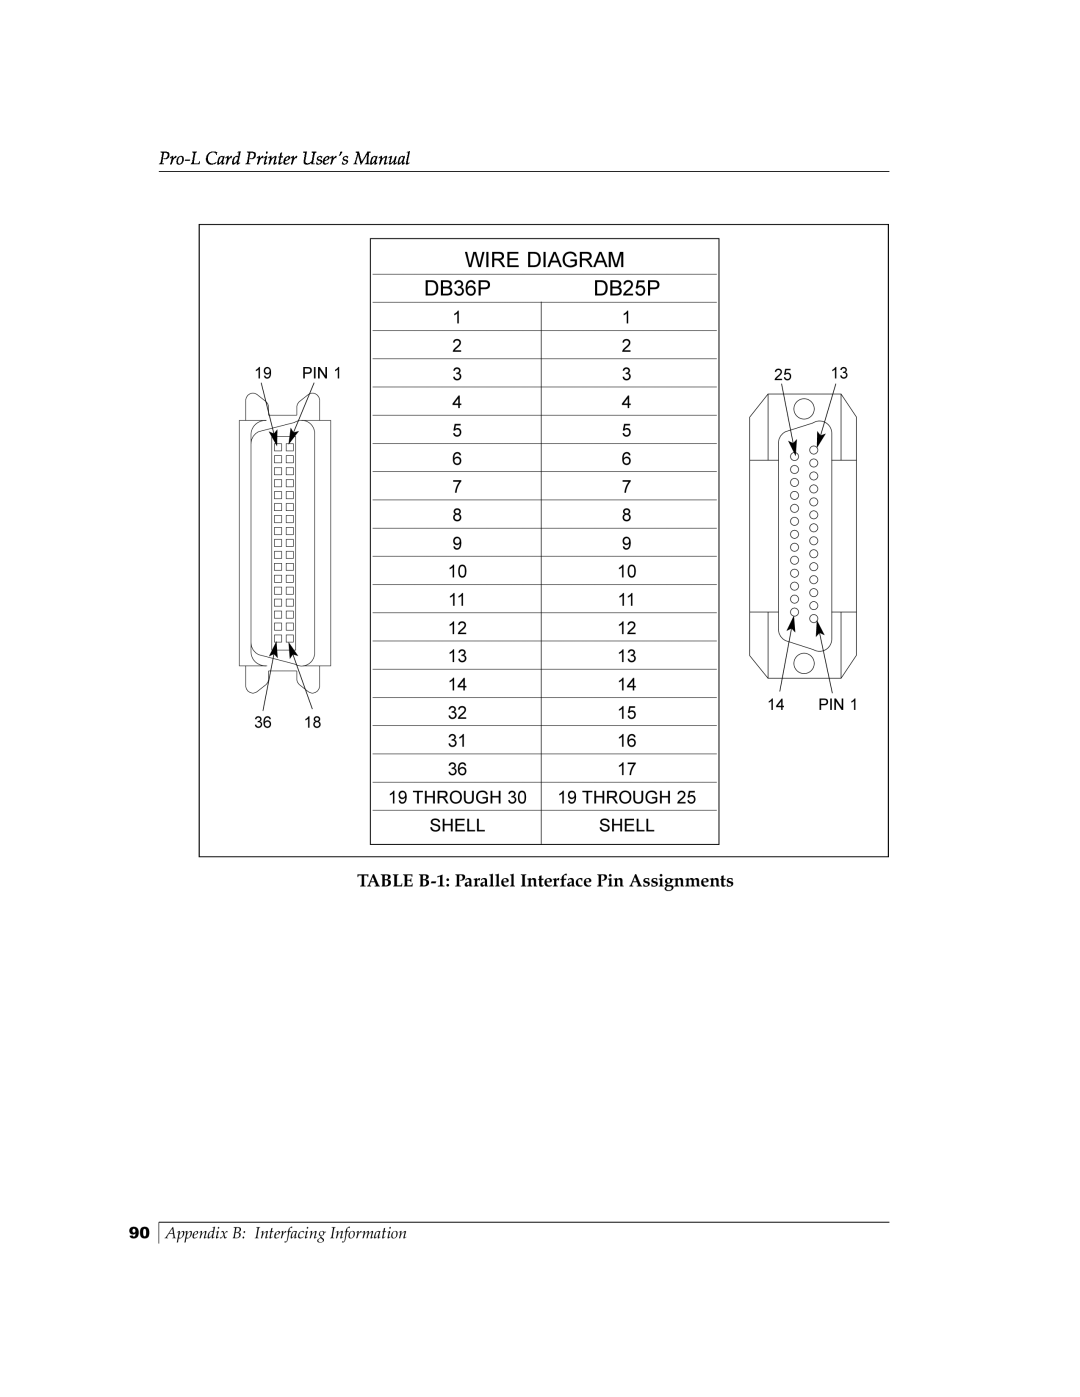 FARGO electronic Pro-L manual TABLE B-1 Parallel Interface Pin Assignments, Wire Diagram, DB36P, DB25P 